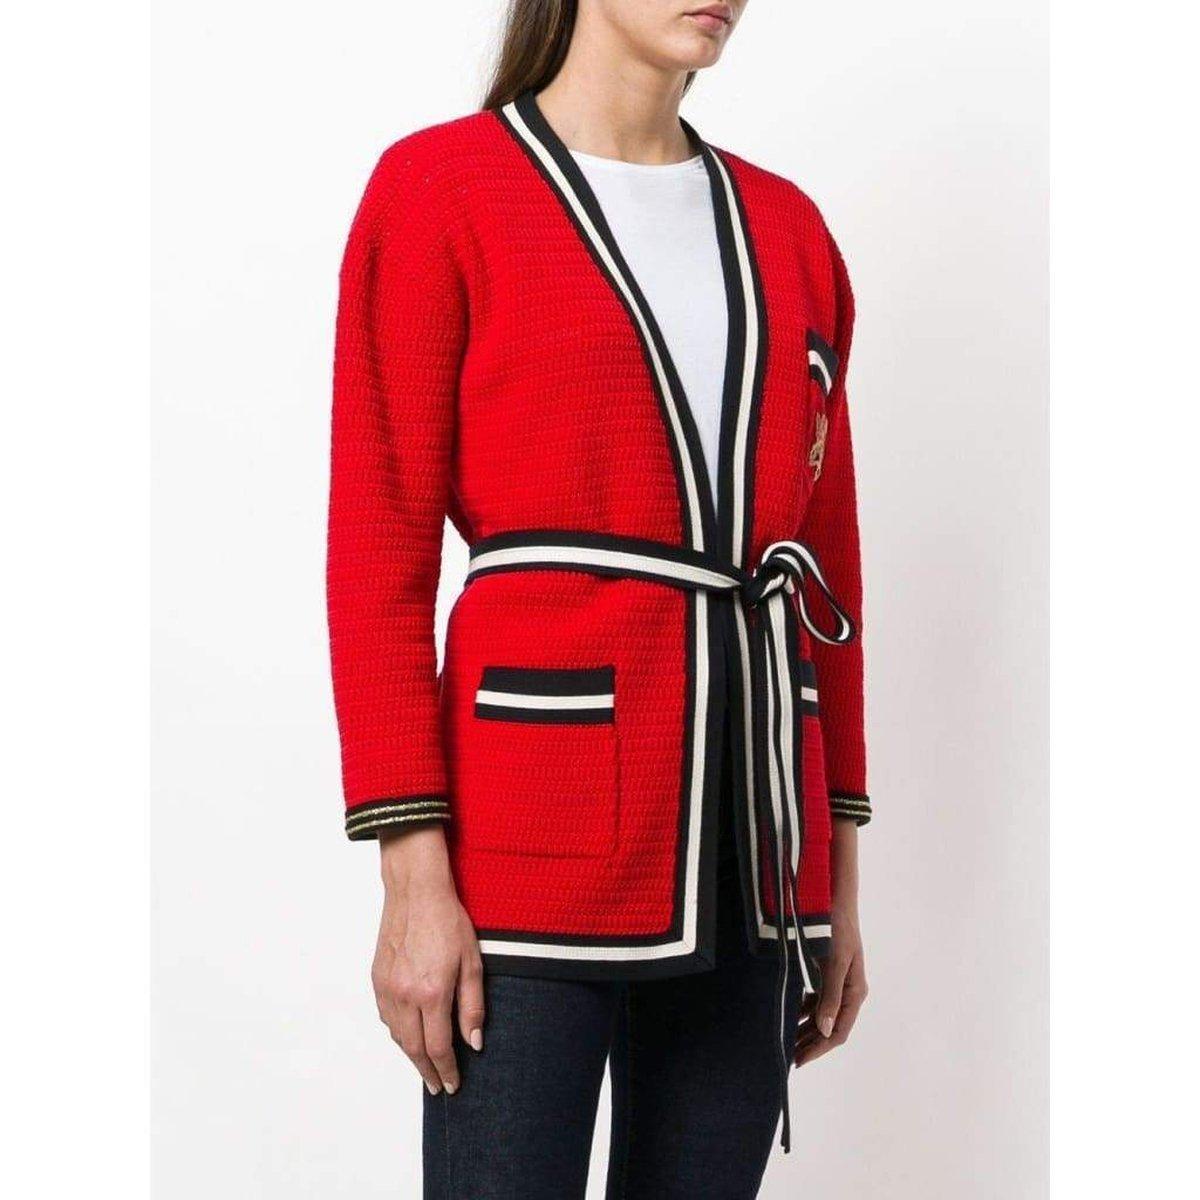 Gucci Striped Hem Cardigan Coat size L In New Condition For Sale In Brossard, QC